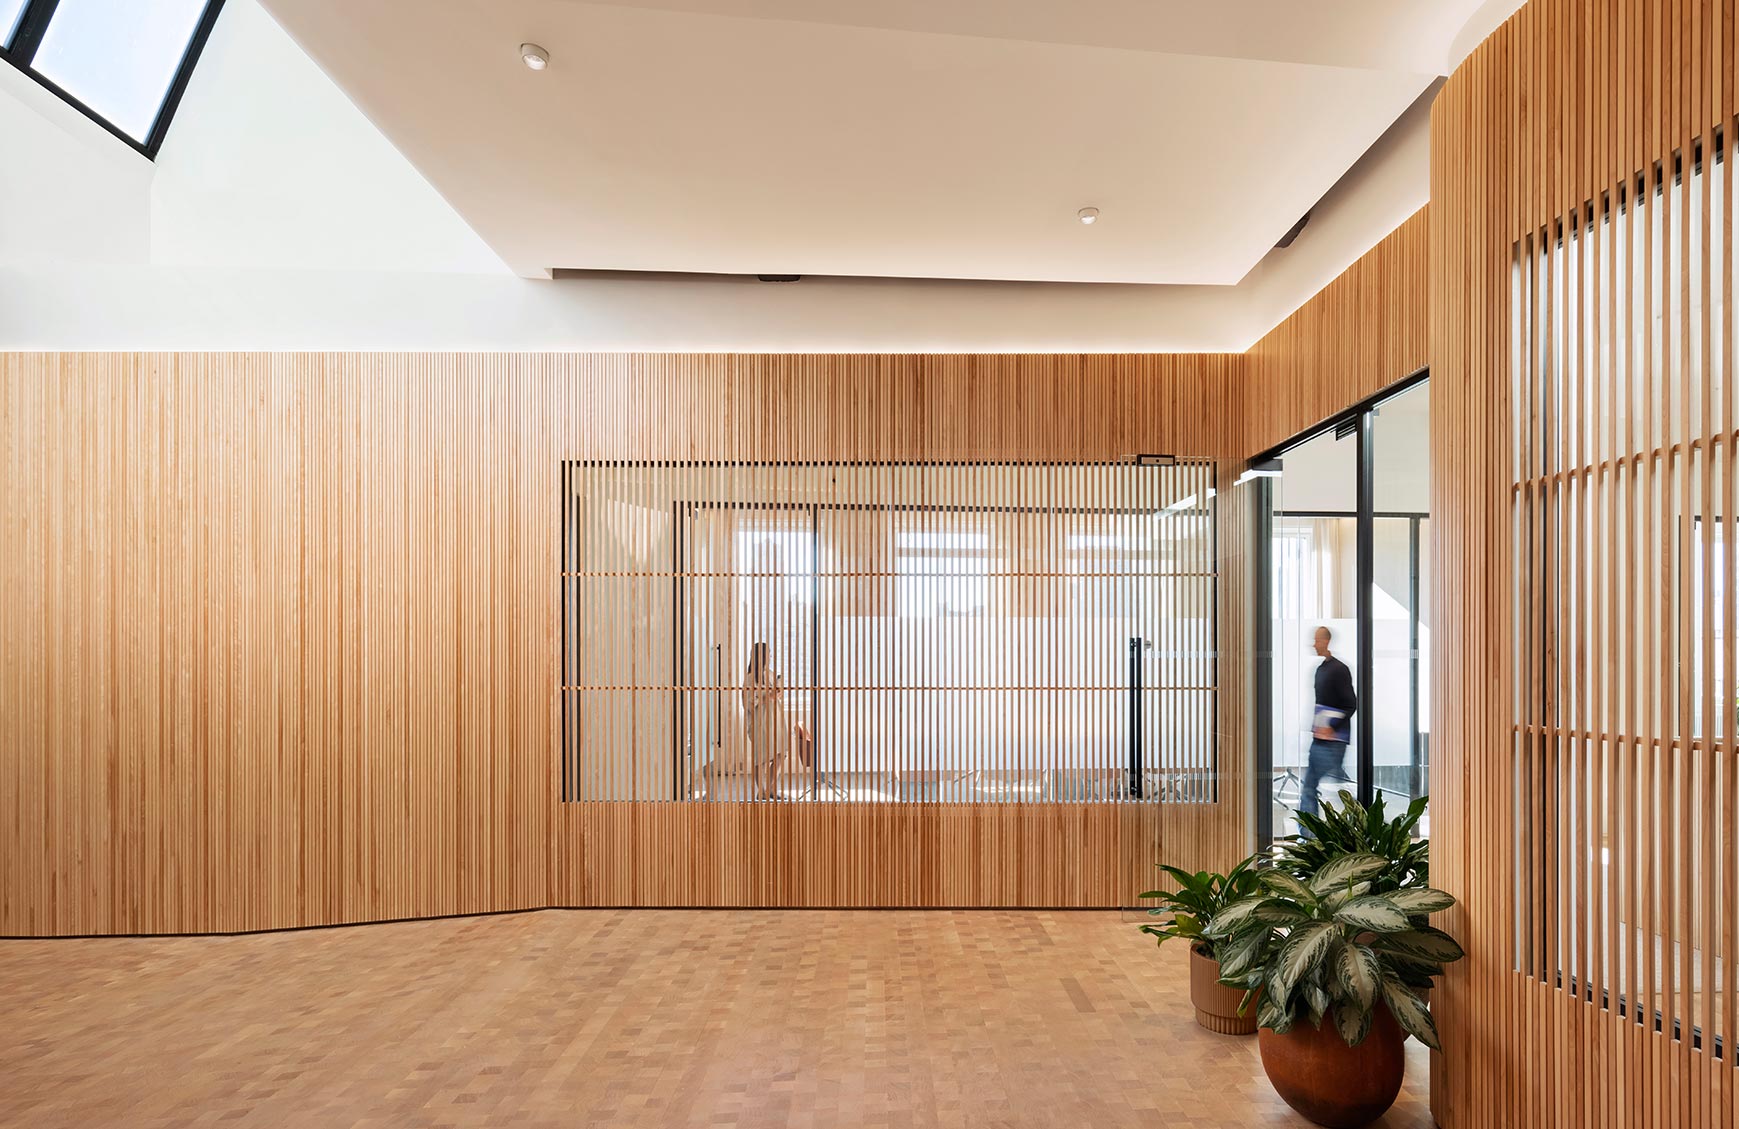 Shared Office, NYC - The renovation of a 17,000-SF penthouse office provides a new workplace for several distinct firms sharing common amenities.